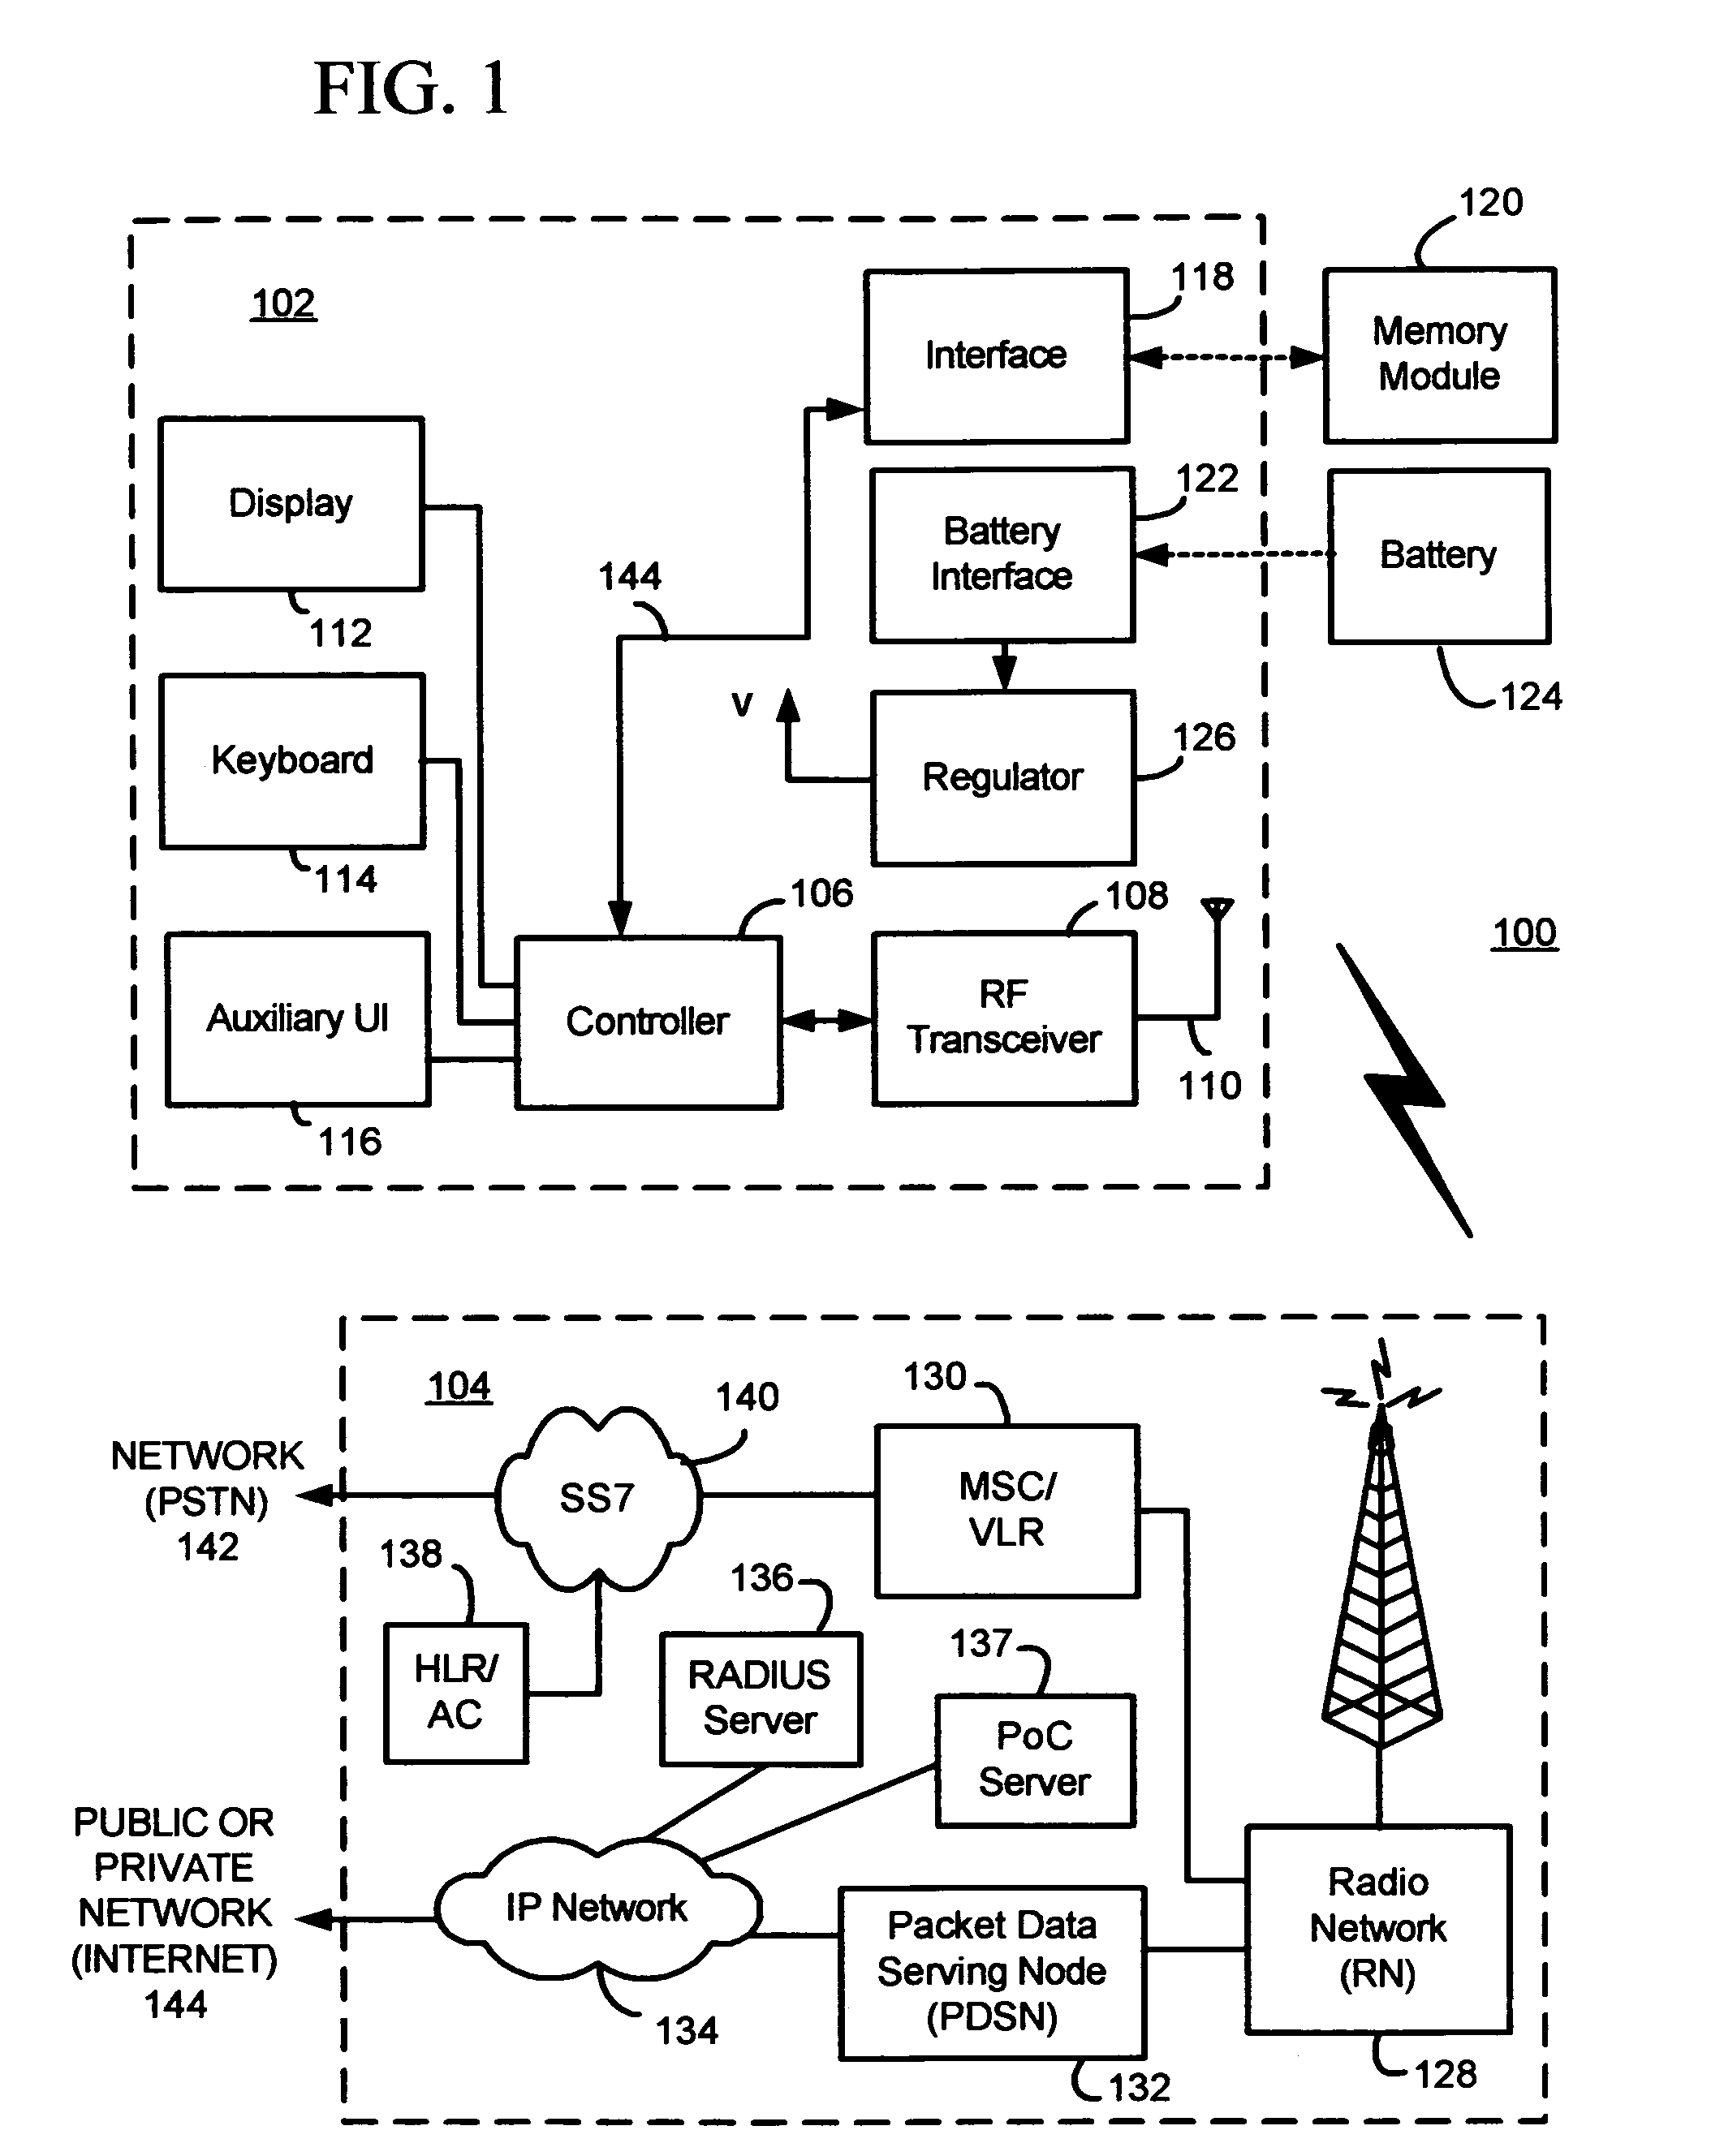 Methods and apparatus for the immediate acceptance and queuing of voice data for PTT communications